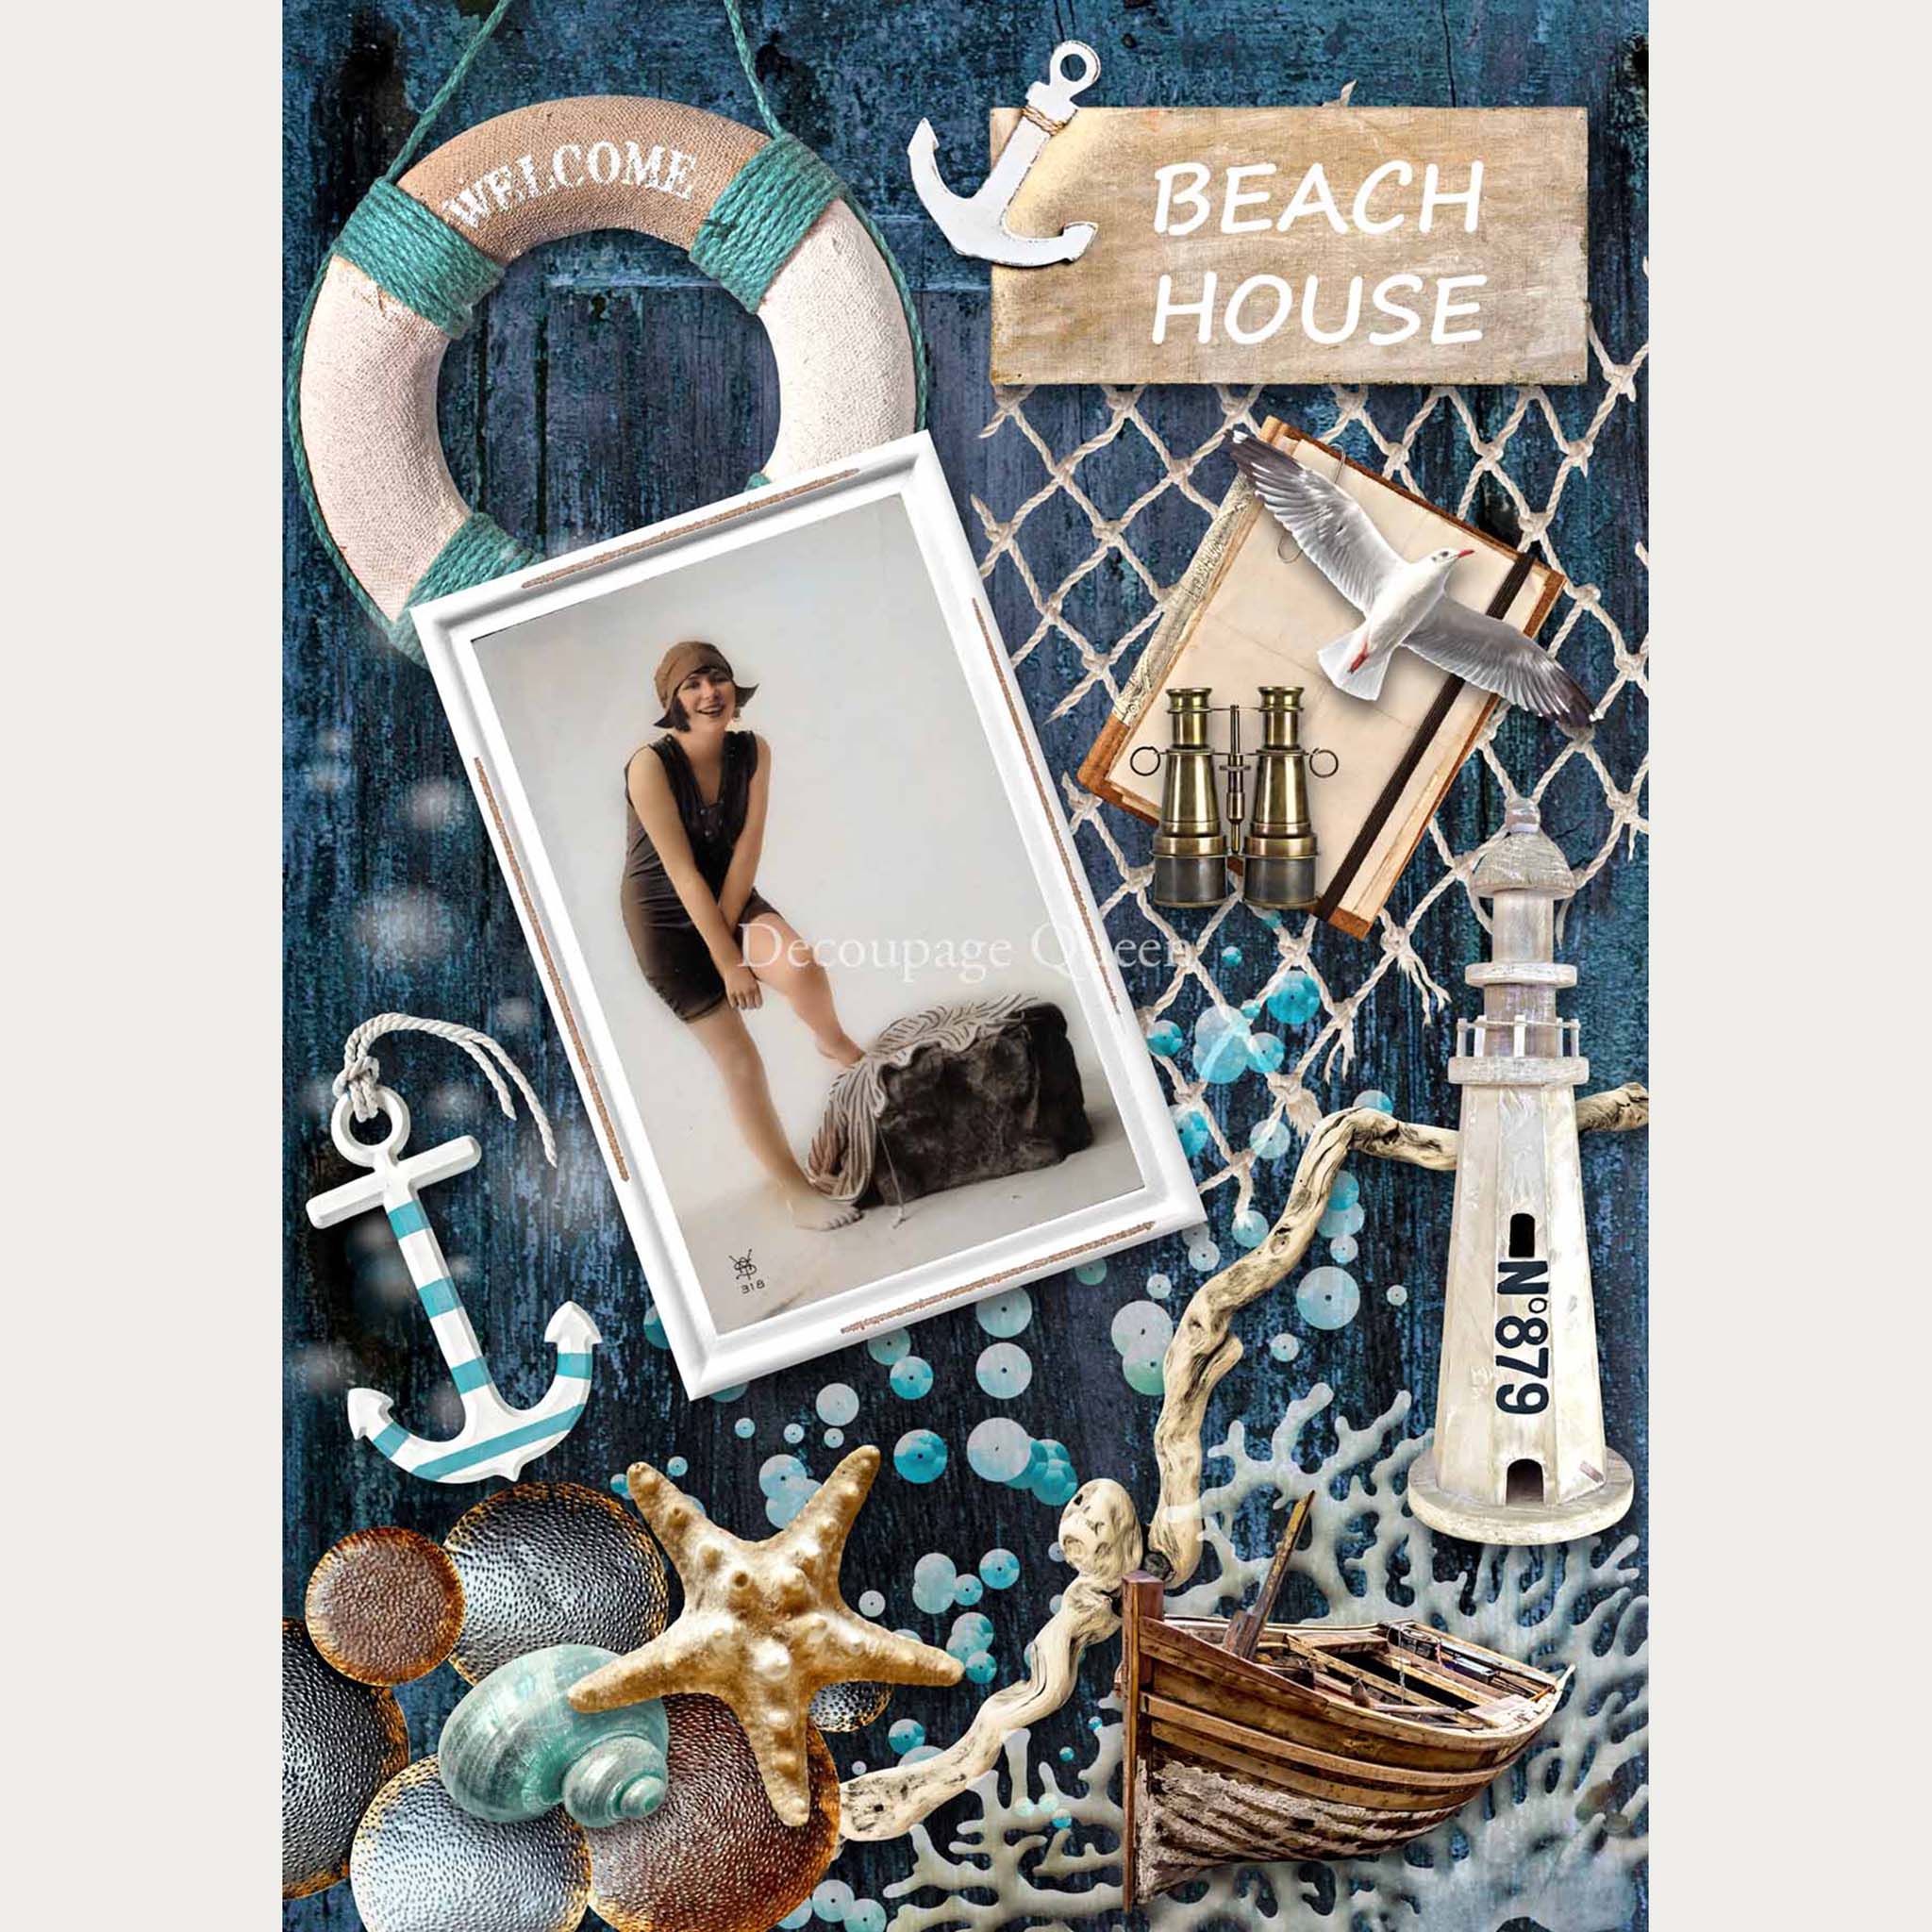 A4 rice paper design of a collage of beach house decorations and a portrait of a vintage 1920's woman in a swimsuit. White borders on the sides.